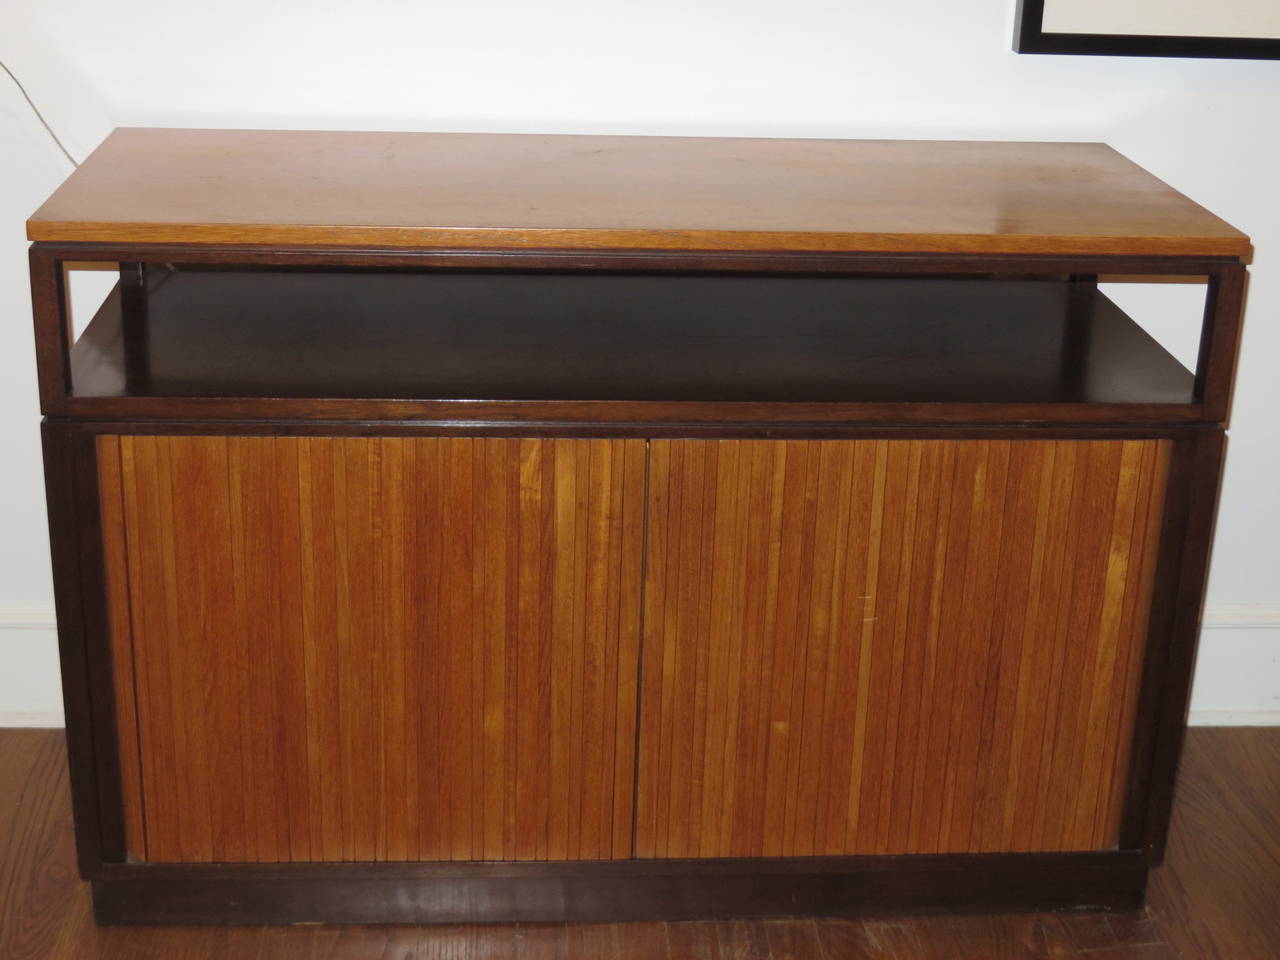 Very functional credenza could be used as a bar.  Behind tambour doors is a very useful configuration for storage and serving.